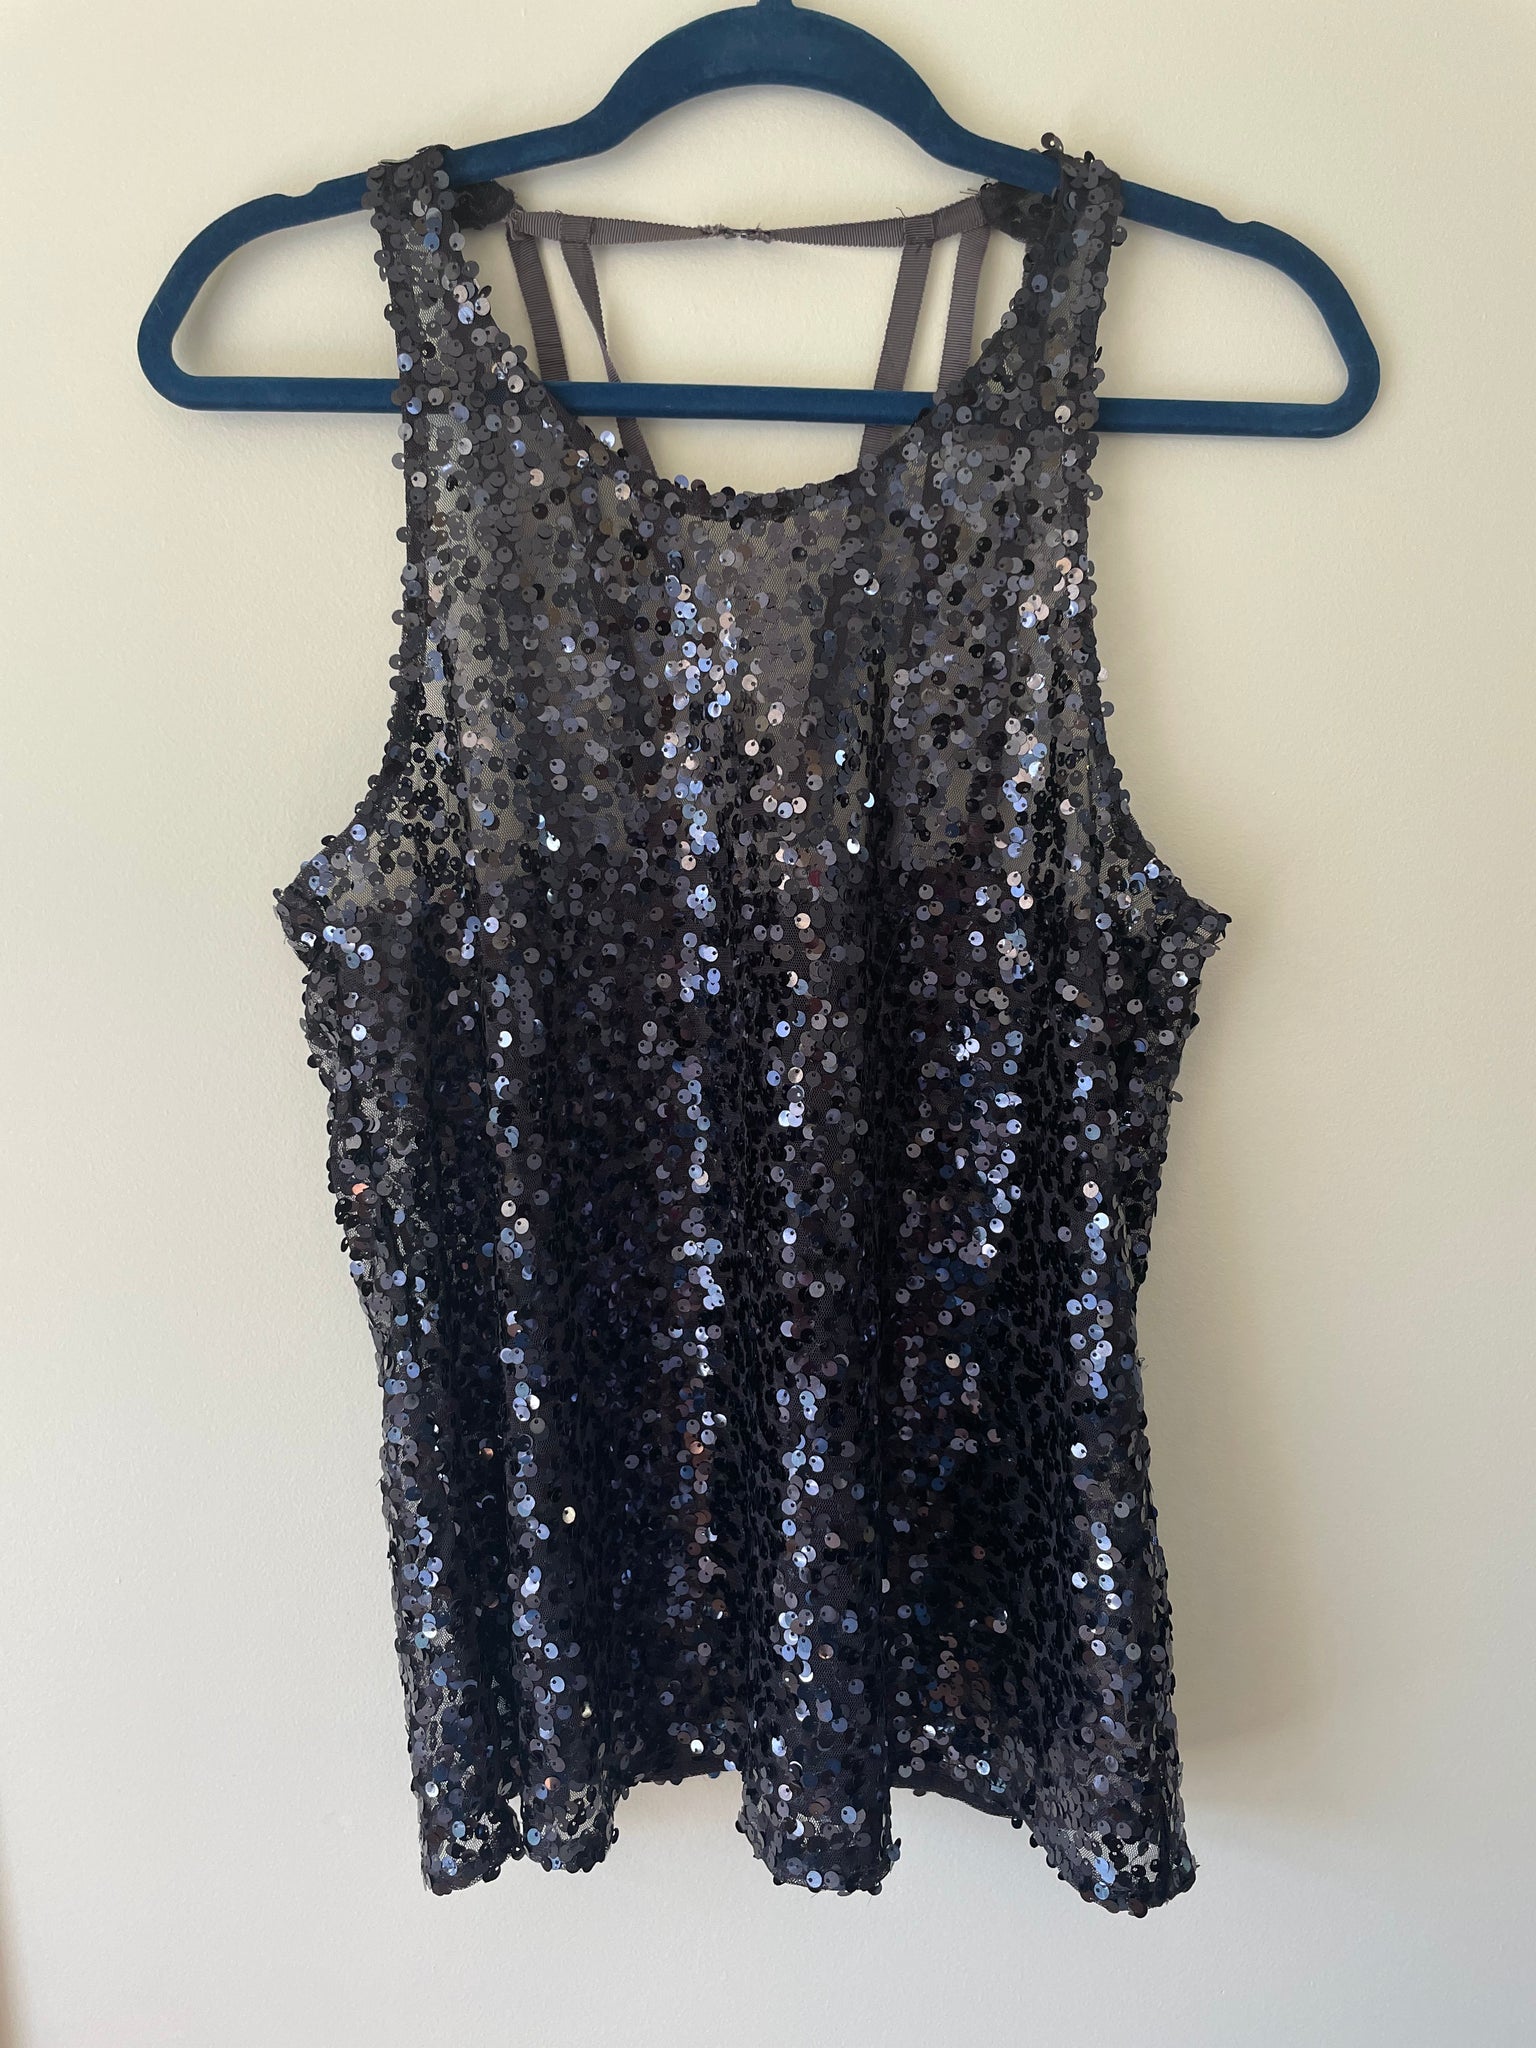 Free People sequin tank top, Size S